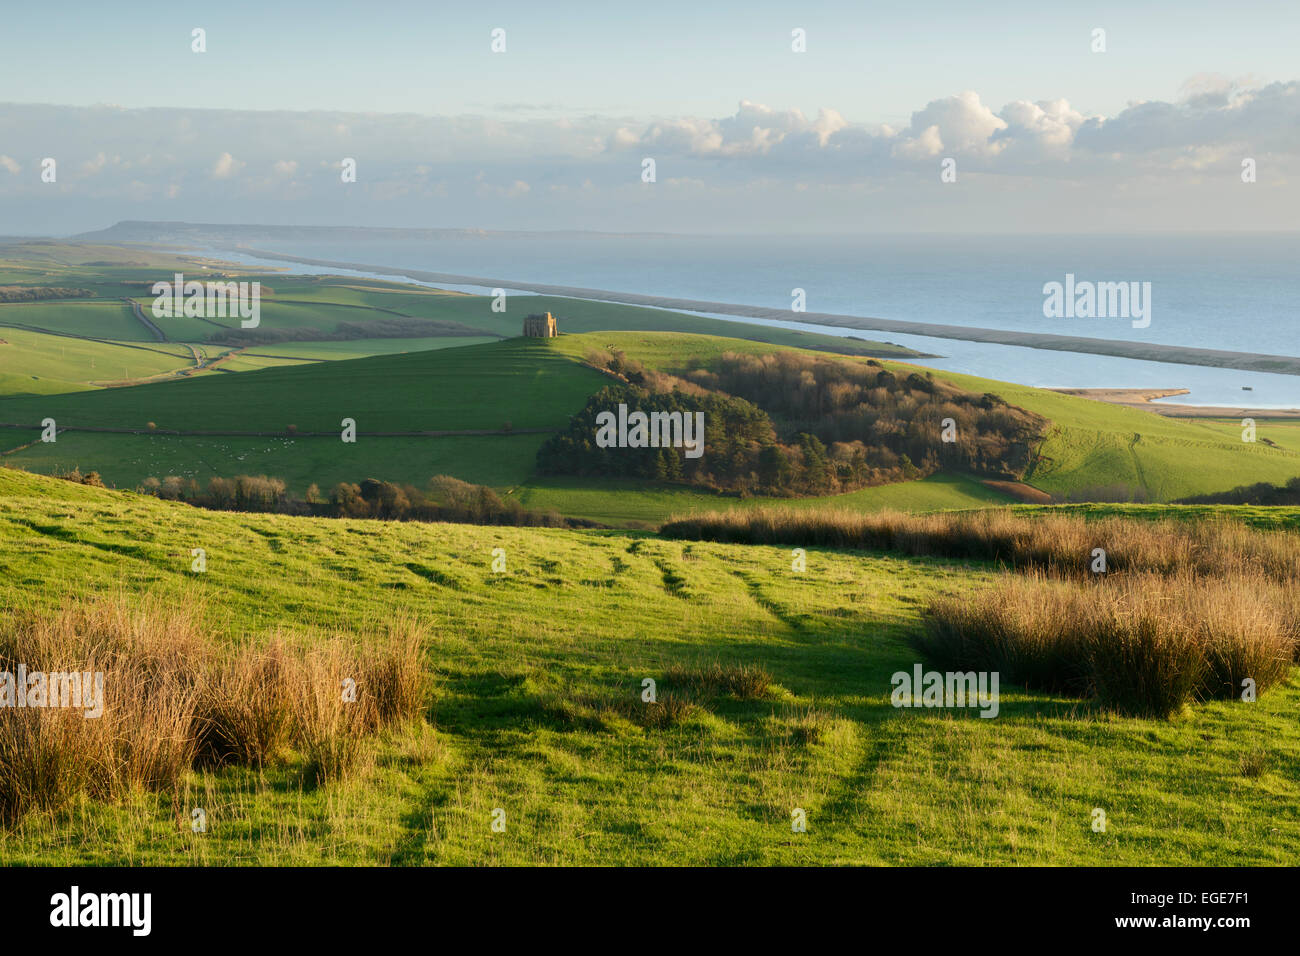 View towards St Catherine's Chapel which sits on a hill overlooking Abbotsbury and the Dorset coastline. Stock Photo